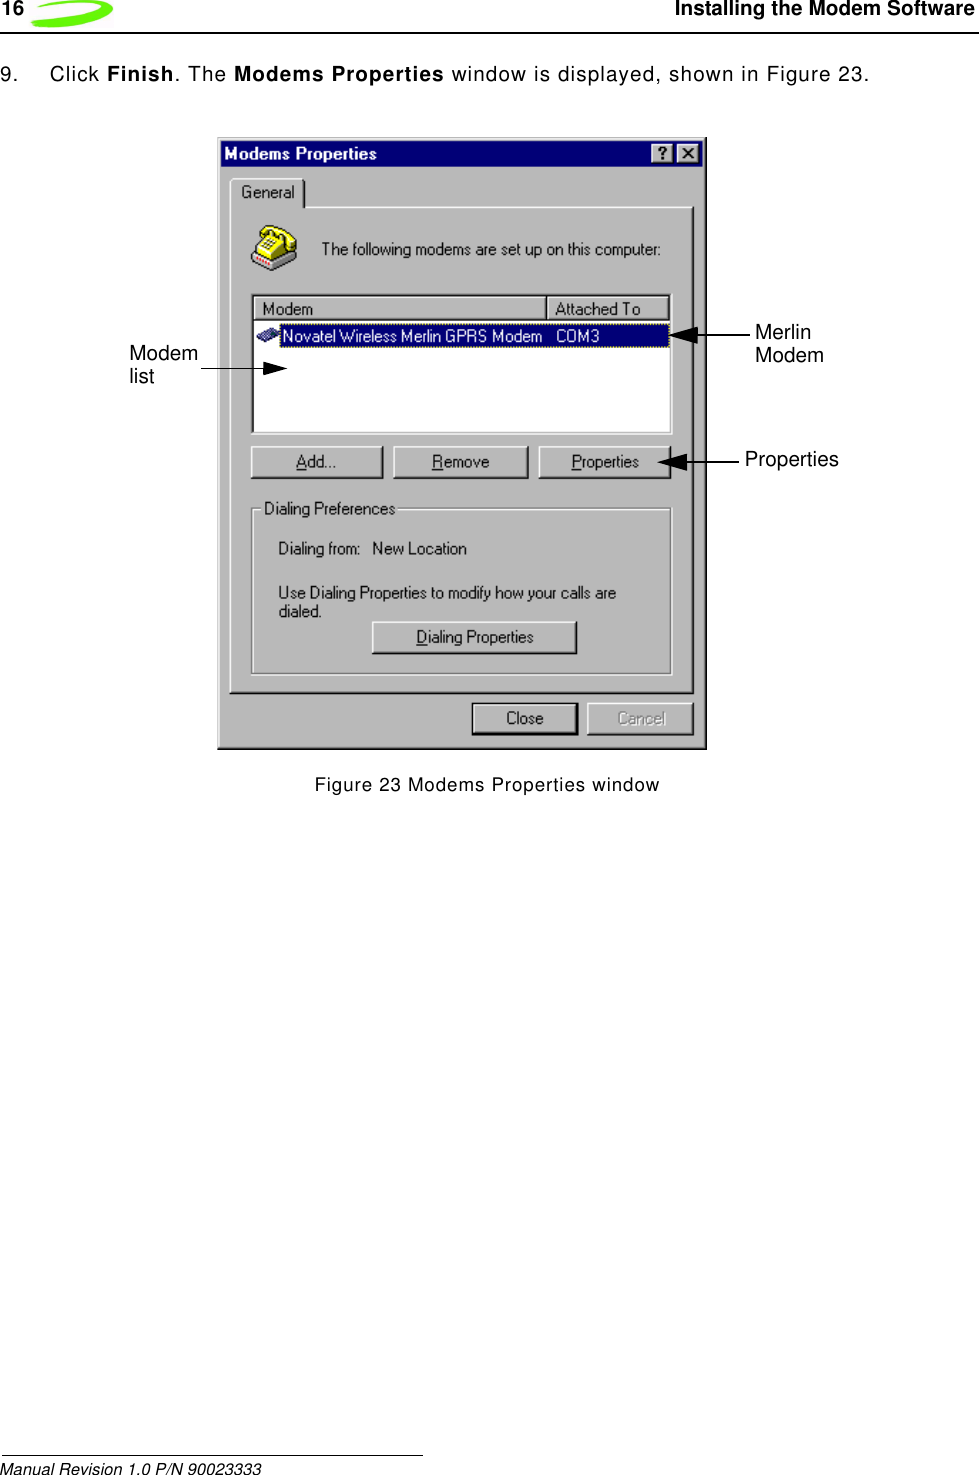 16  Installing the Modem SoftwareManual Revision 1.0 P/N 900233339. Click Finish. The Modems Properties window is displayed, shown in Figure 23.Figure 23 Modems Properties windowPropertiesMerlinModemModemlist